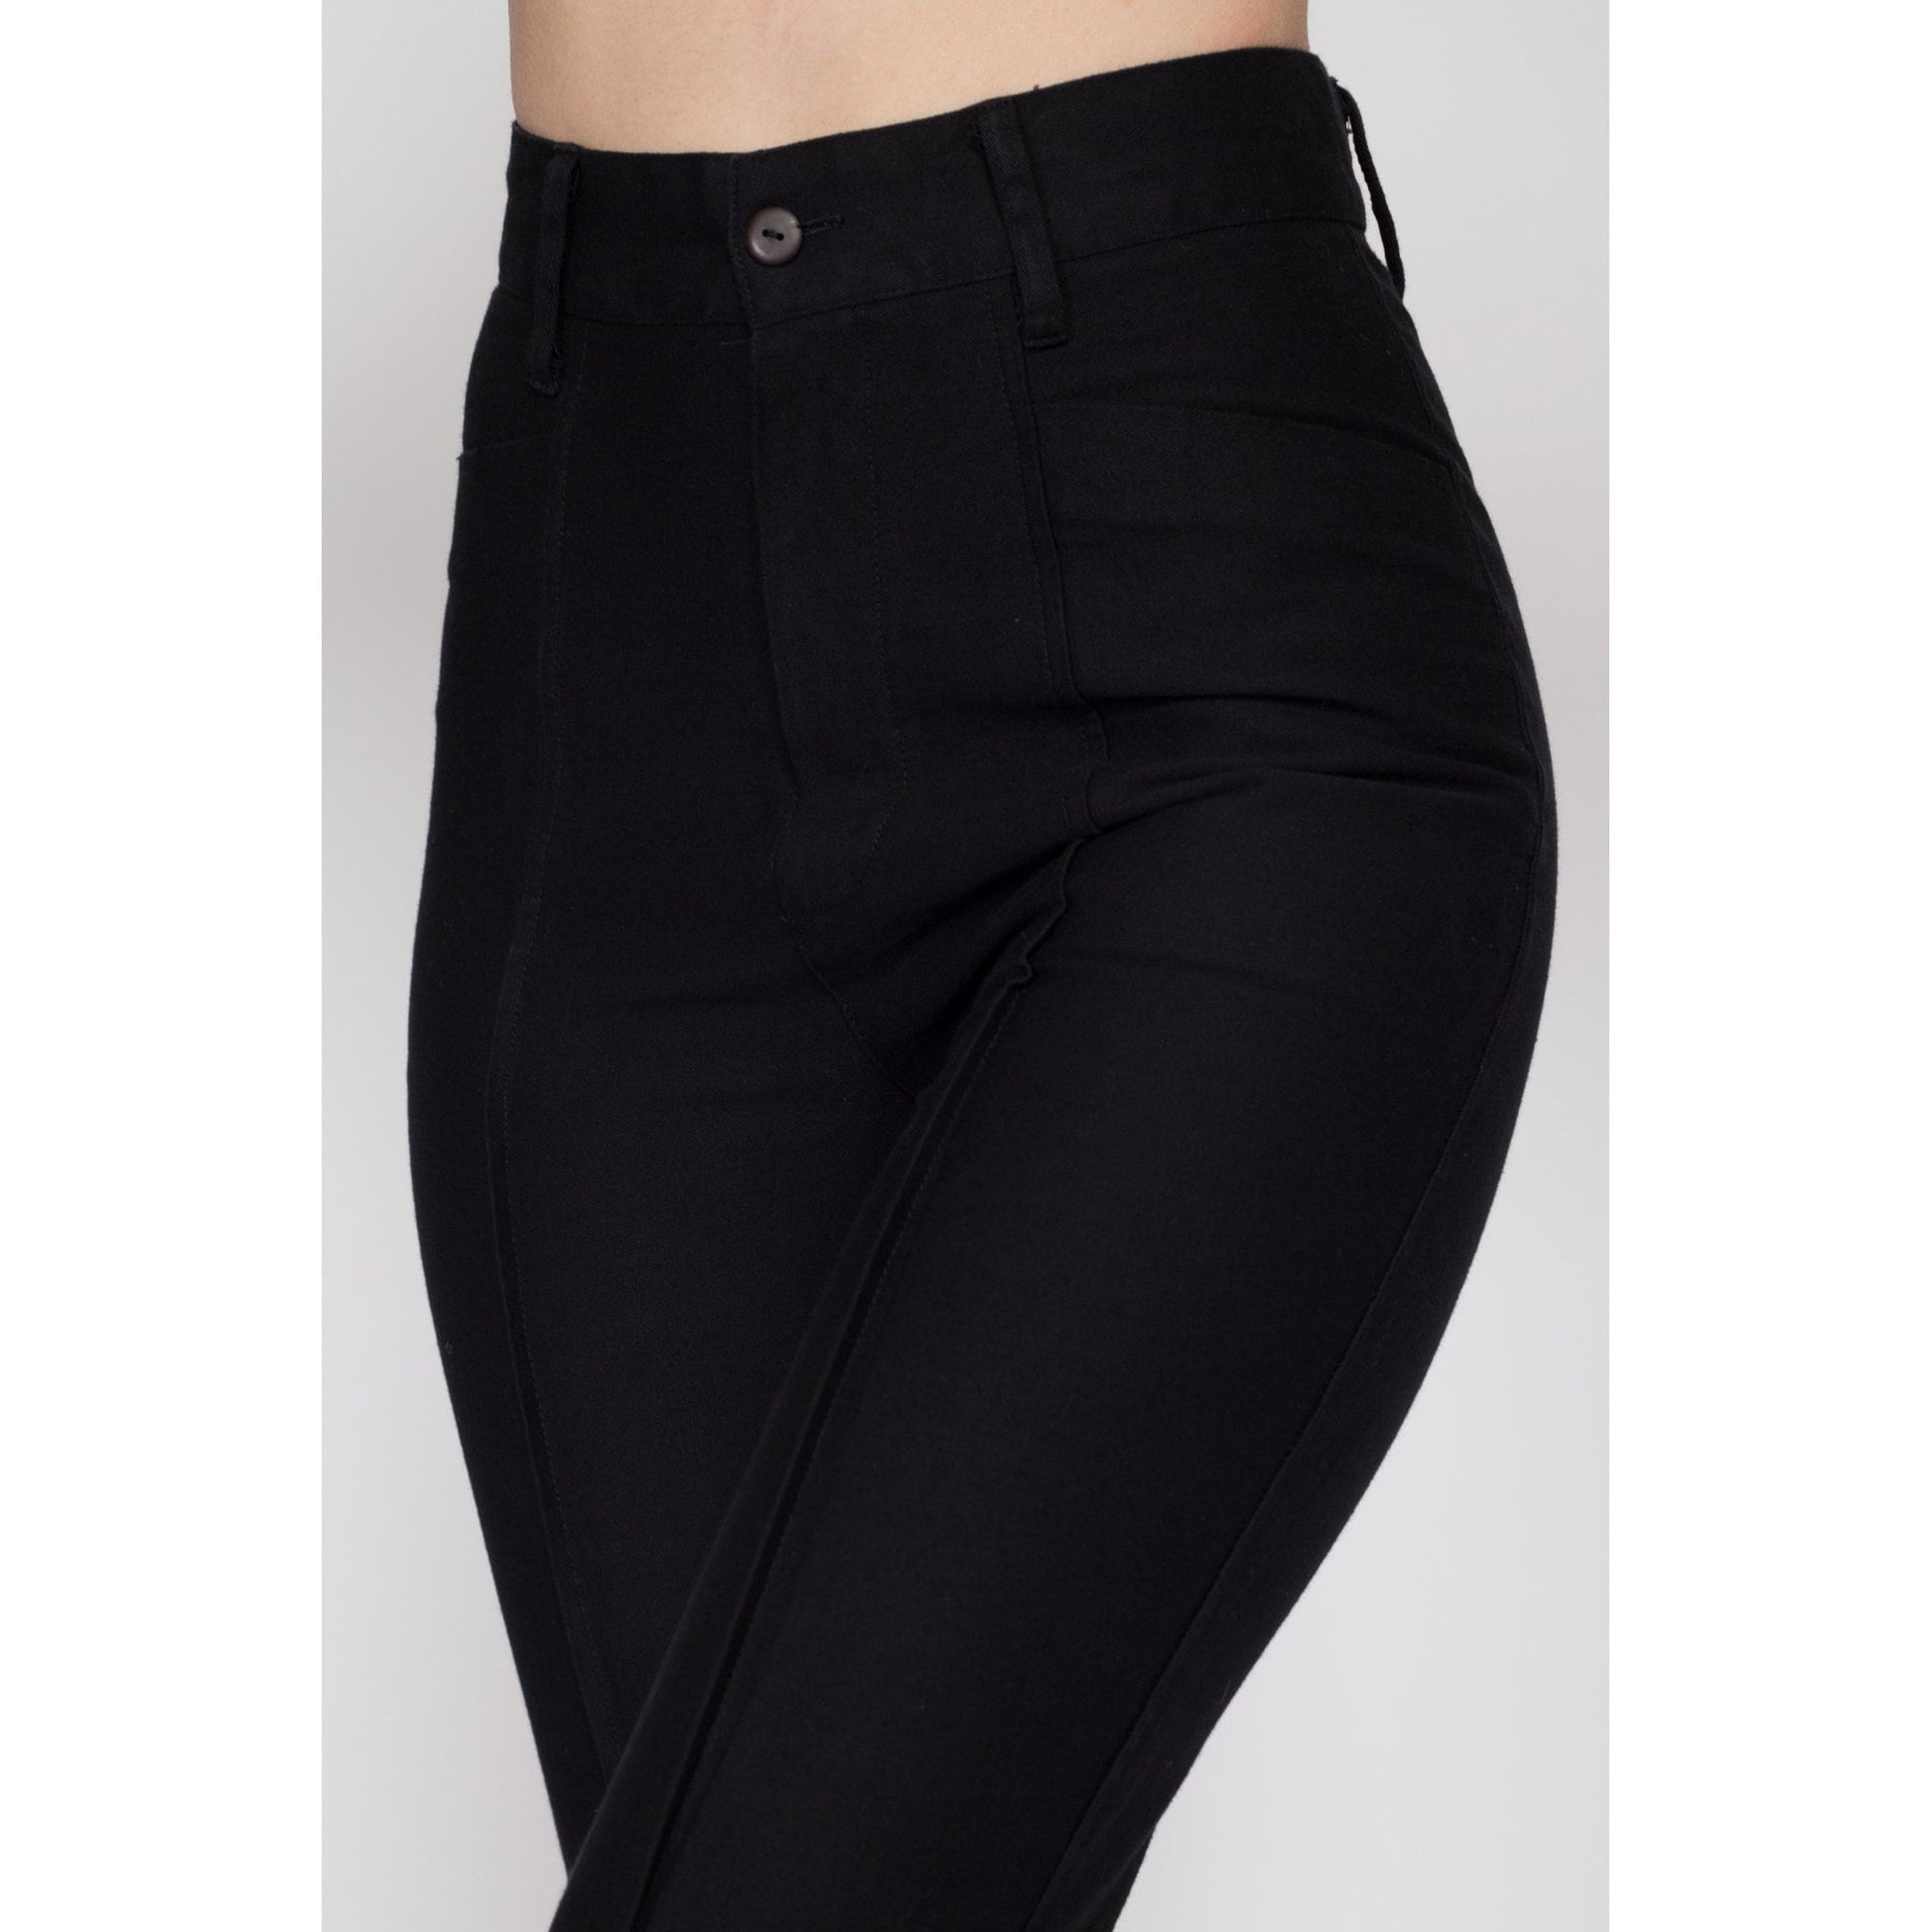 Black High Waist Women Flare Leggings, Party Wear, Slim Fit at Rs